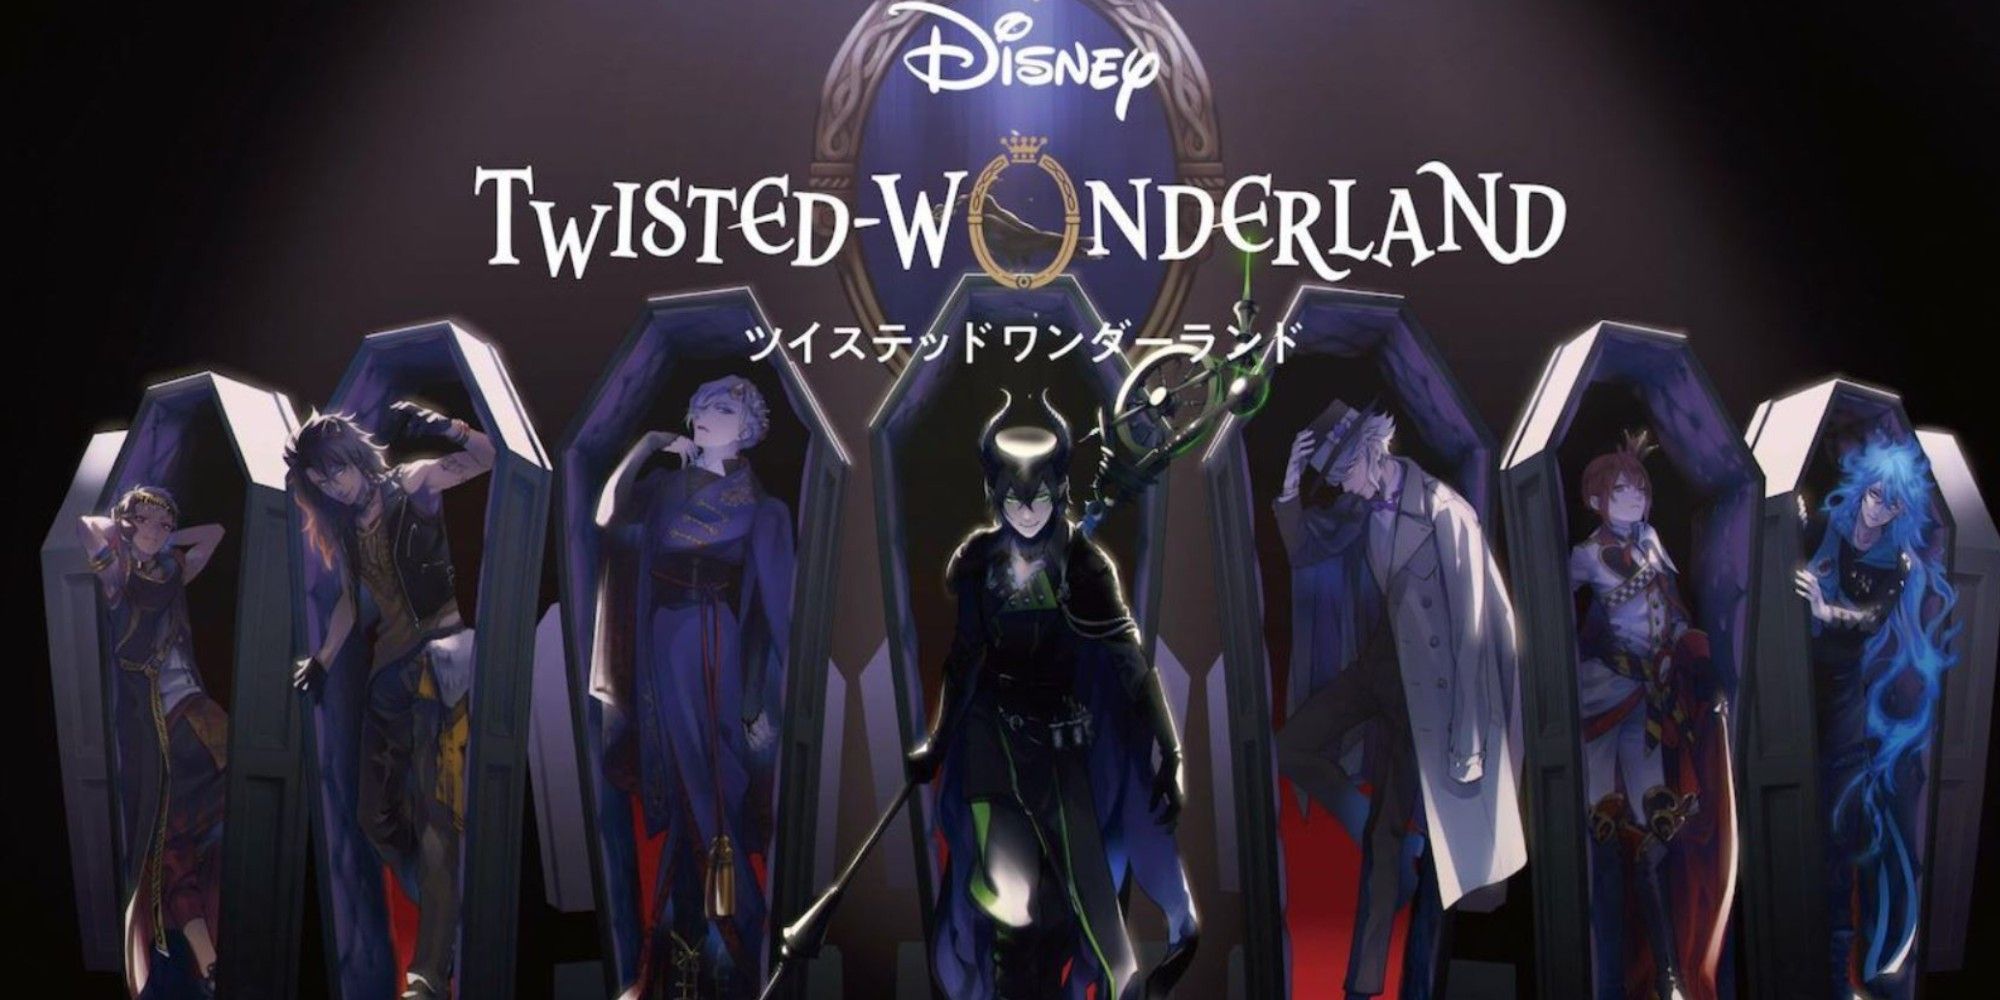 The title screen showing Disney Twisted Wonderland